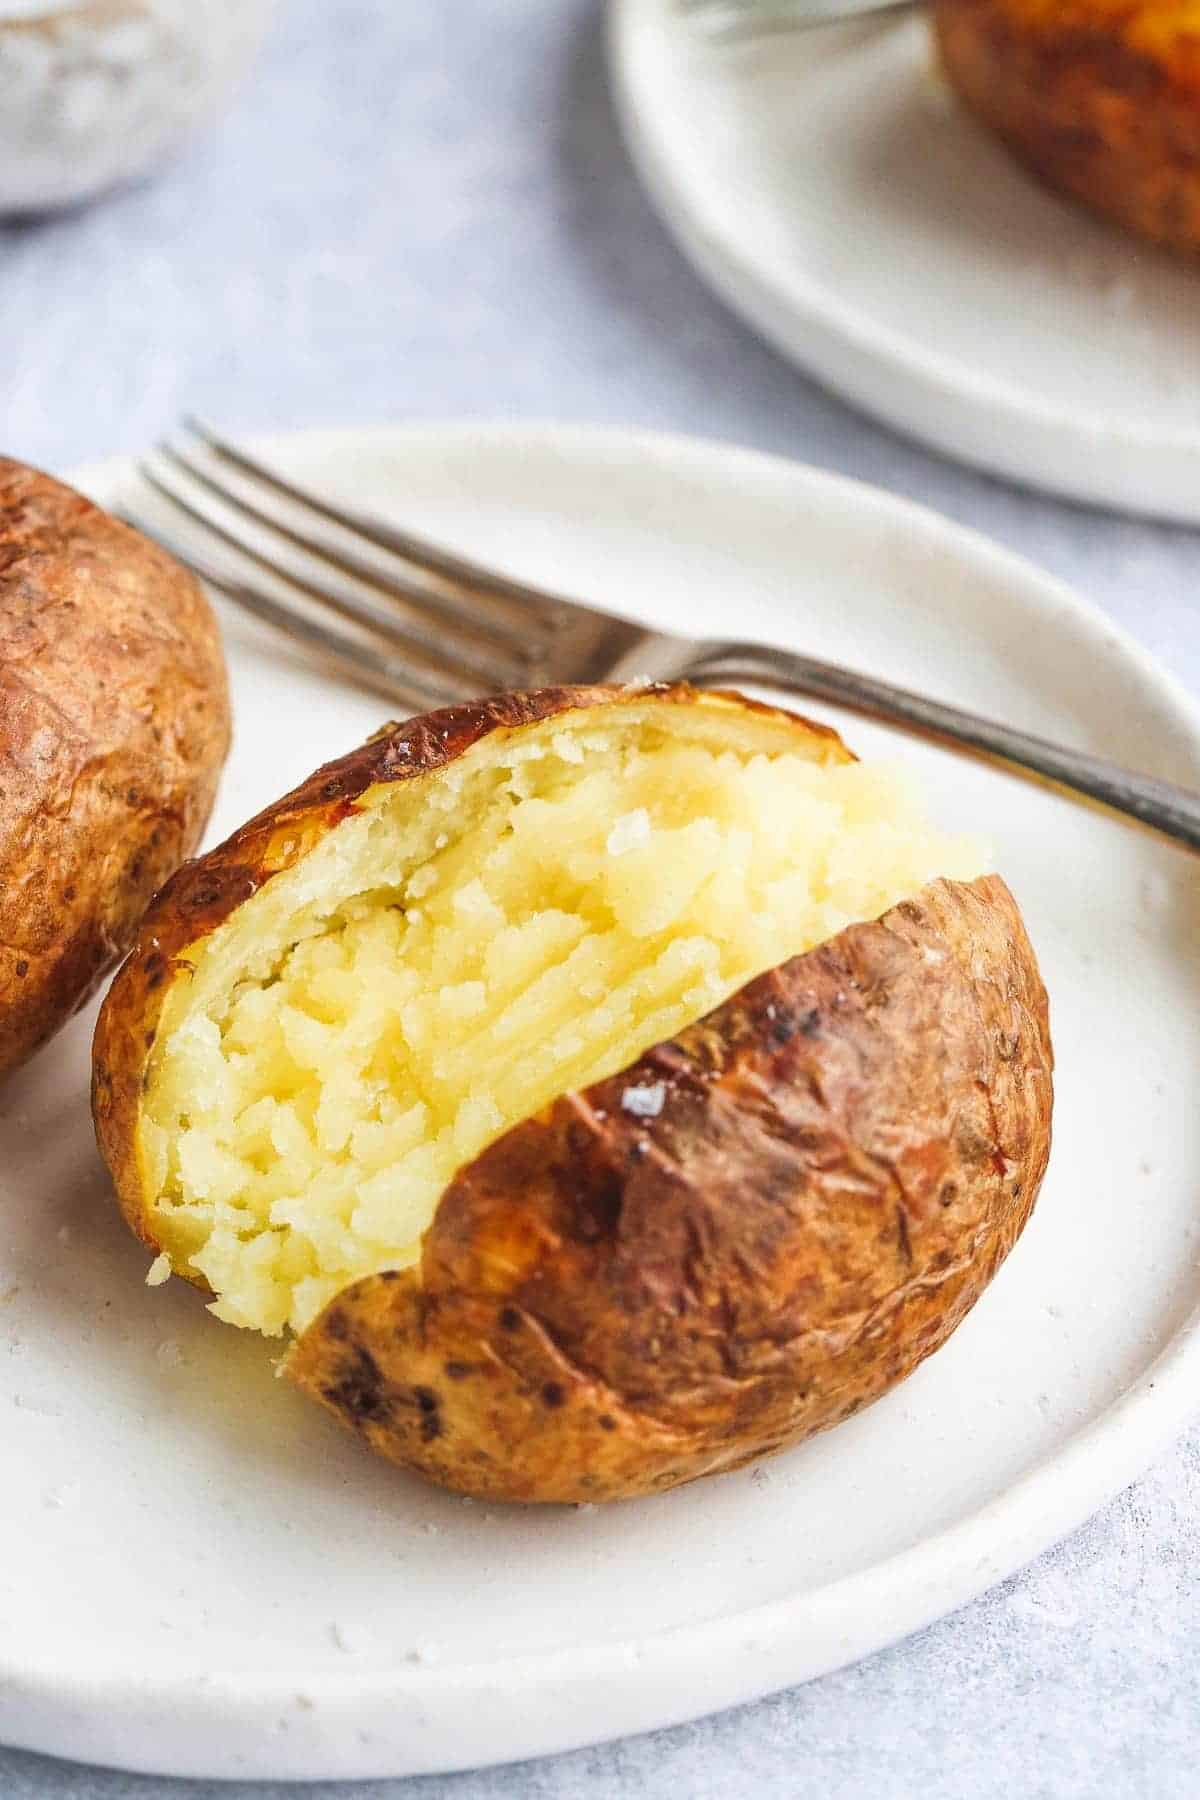 Air fryer baked potatoes using cooking spray